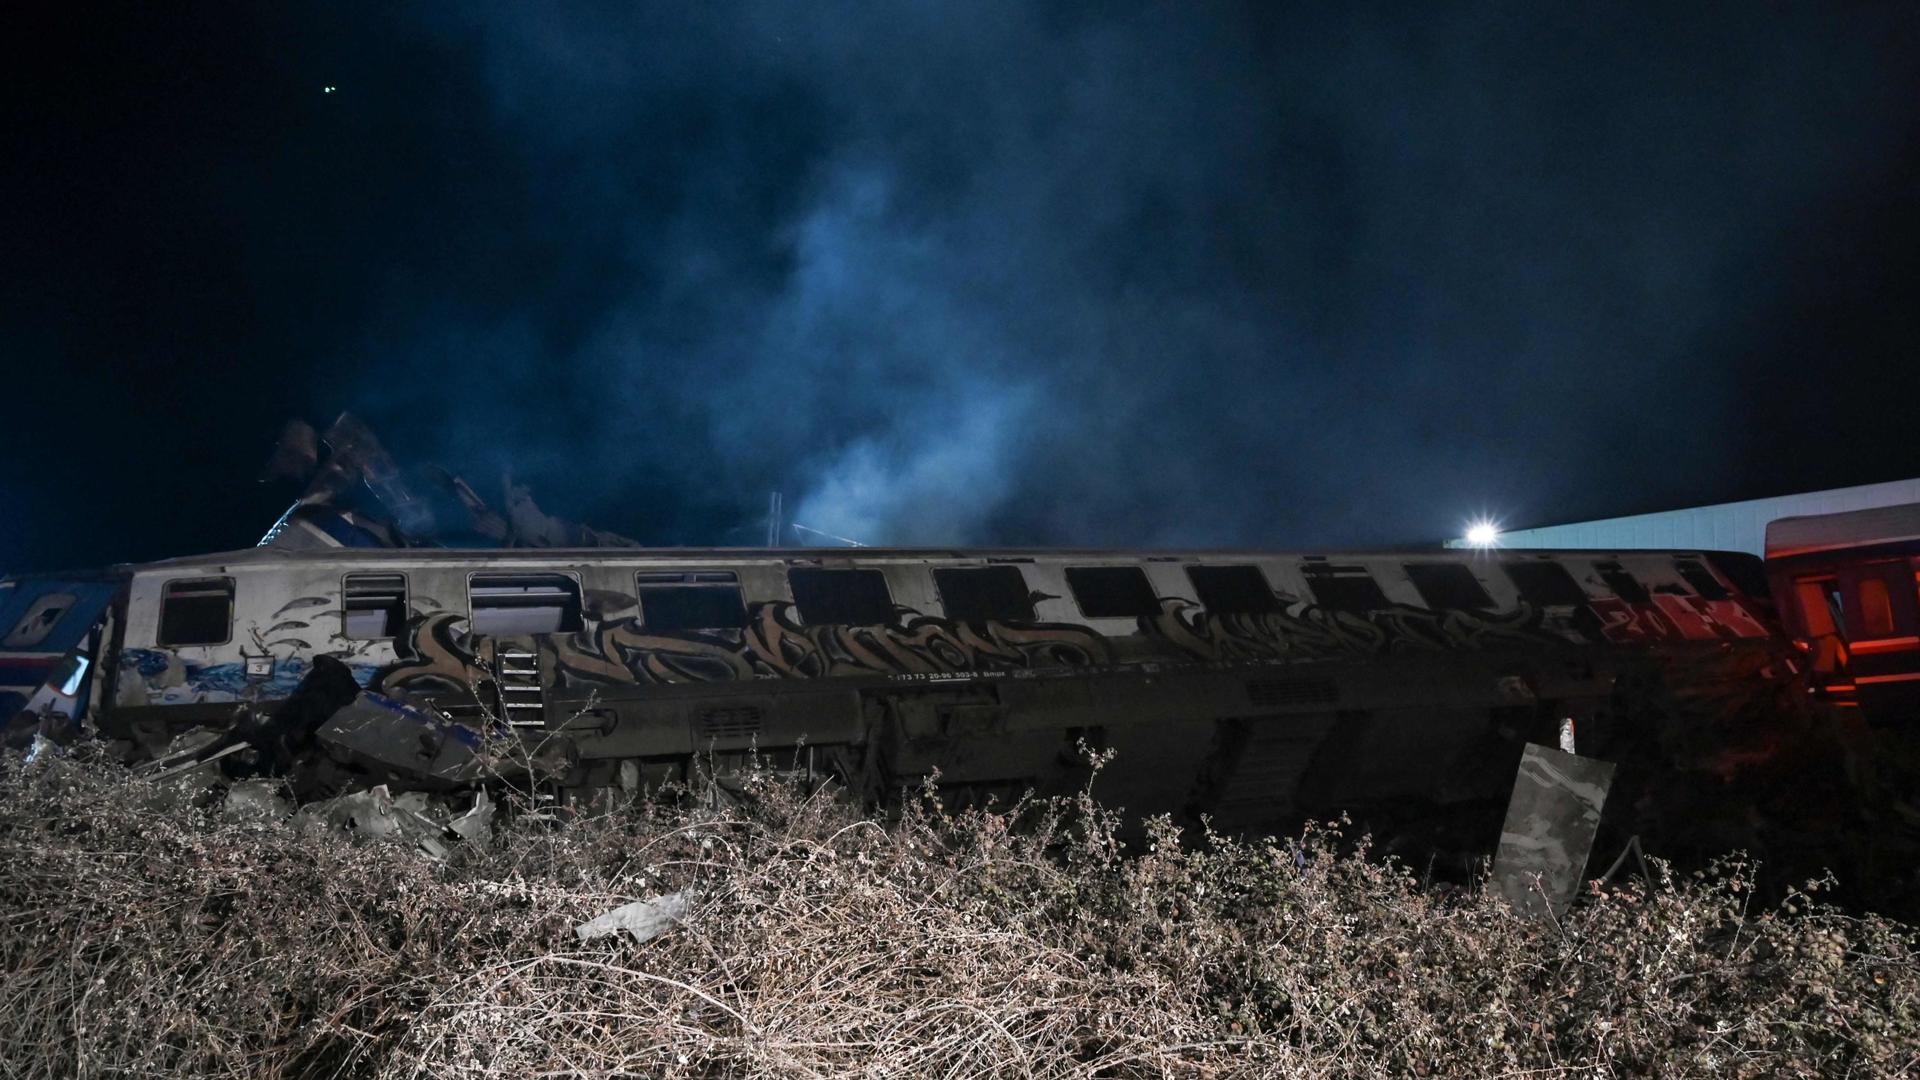 TOPSHOT - Derailed cars are lying on their sides after a train accident in the Valley of Tempi near Larisa, Greece on March 1, 2023. - At least 29 people were killed and another 85 injured after a collision between two trains caused a derailment near the Greek city of Larissa late Tuesday night, February 28, 2023, authorities said.
A fire services spokesman confirmed that three carriages skipped the tracks just before midnight after the trains -- one for freight and the other carrying 350 passengers �- collided about halfway along the route between Athens and Thessaloniki. (Photo by Sakis MITROLIDIS / AFP)